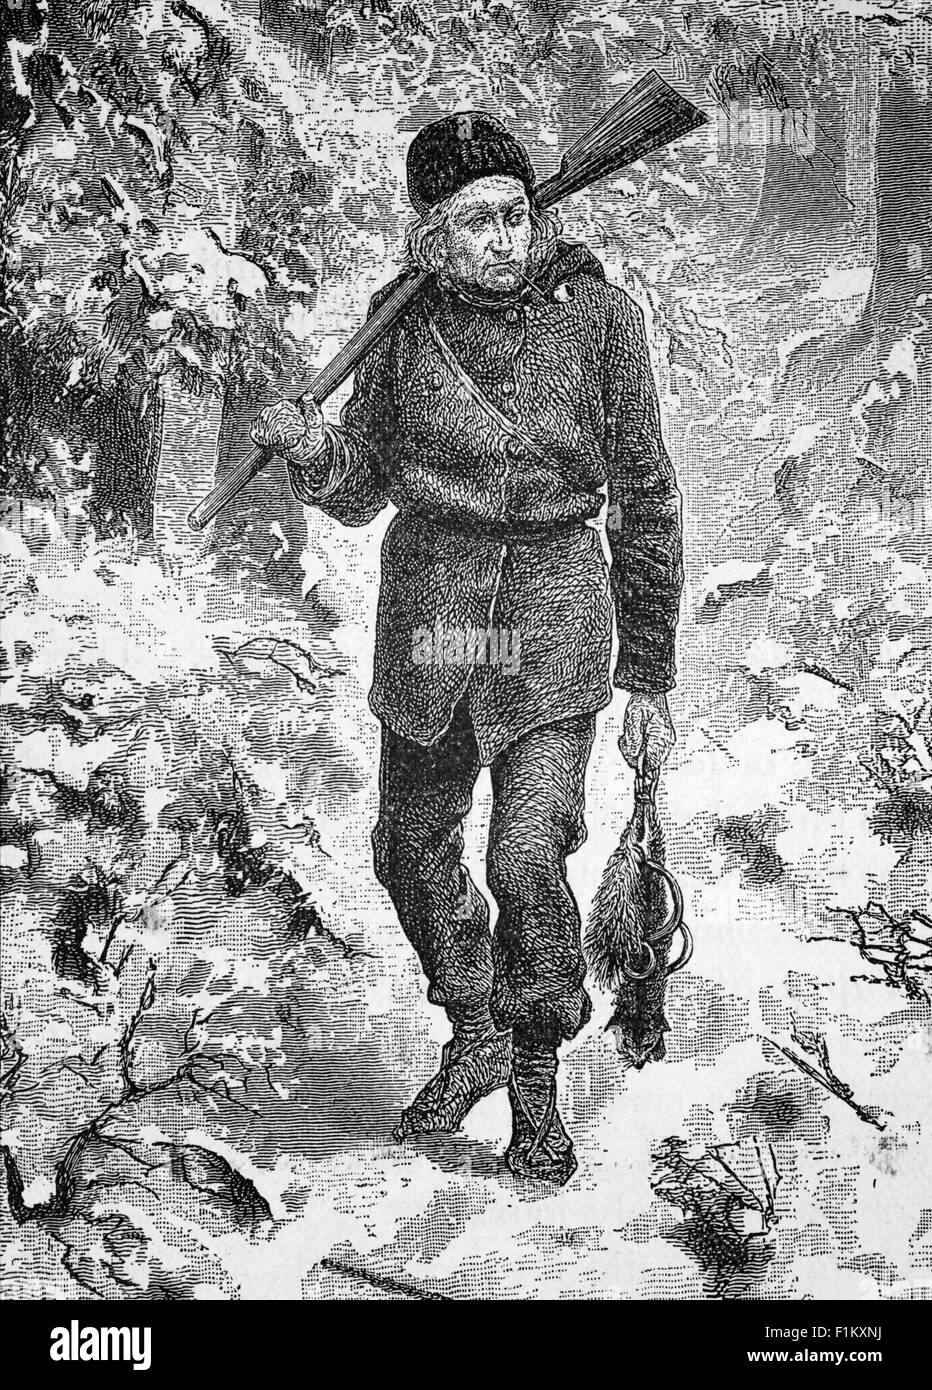 Pipe smoking Canadian Trapper, returning through a snowy forest with his catch -  mink (or similar?) Stock Photo